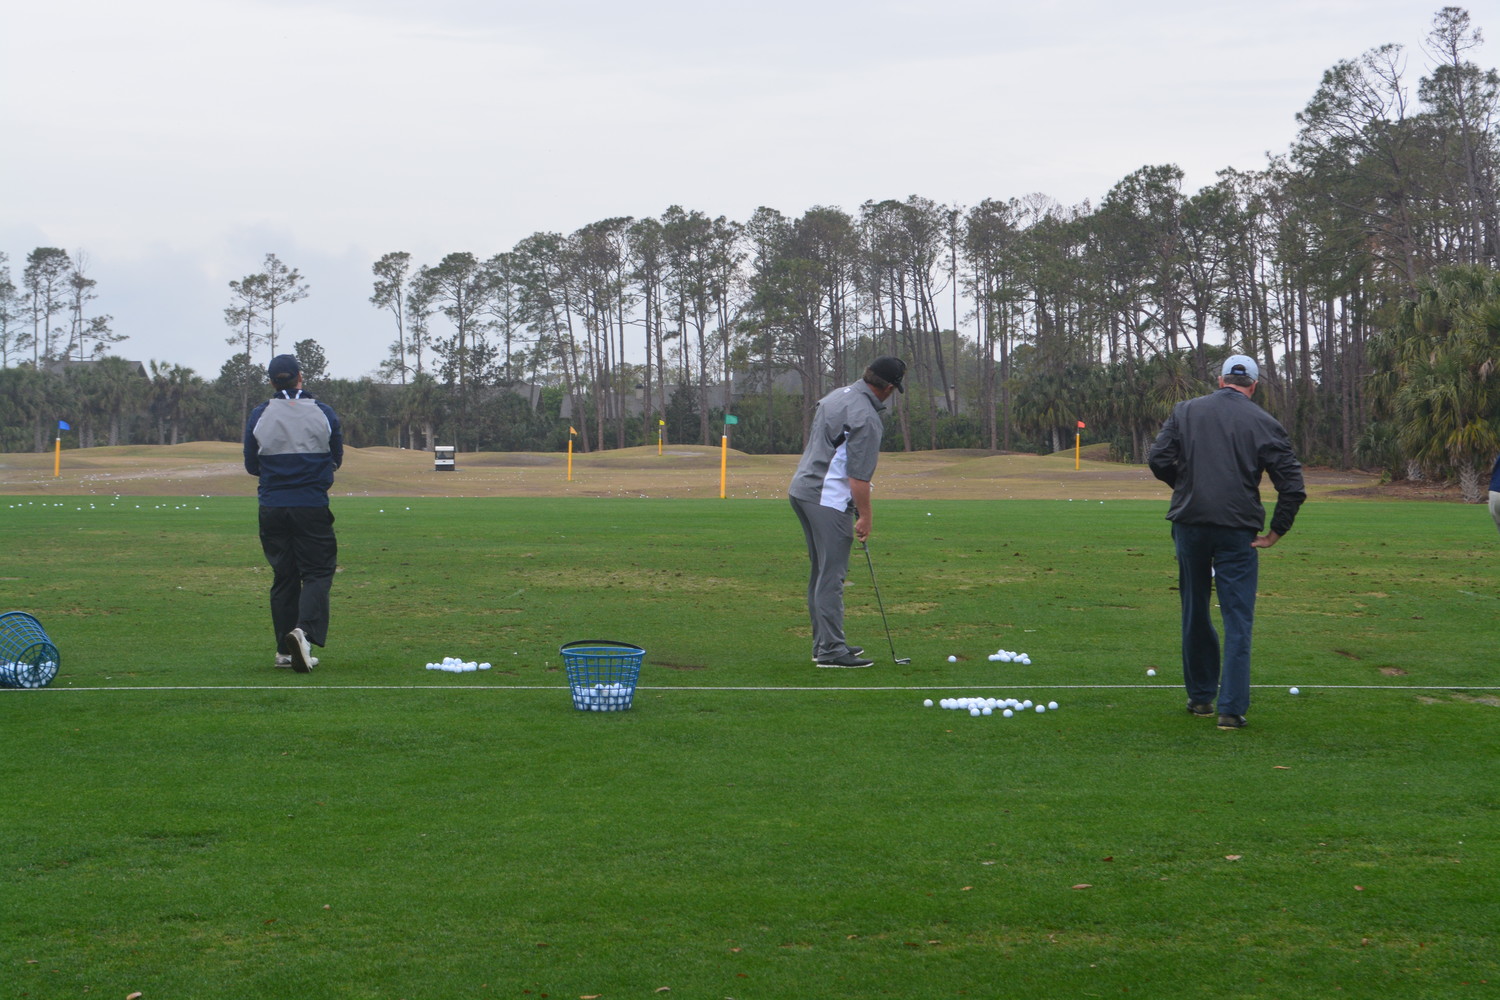 Furyk & Friends Concert & Celebrity Golf Classic participants practice their swing prior to the start of the tournament.